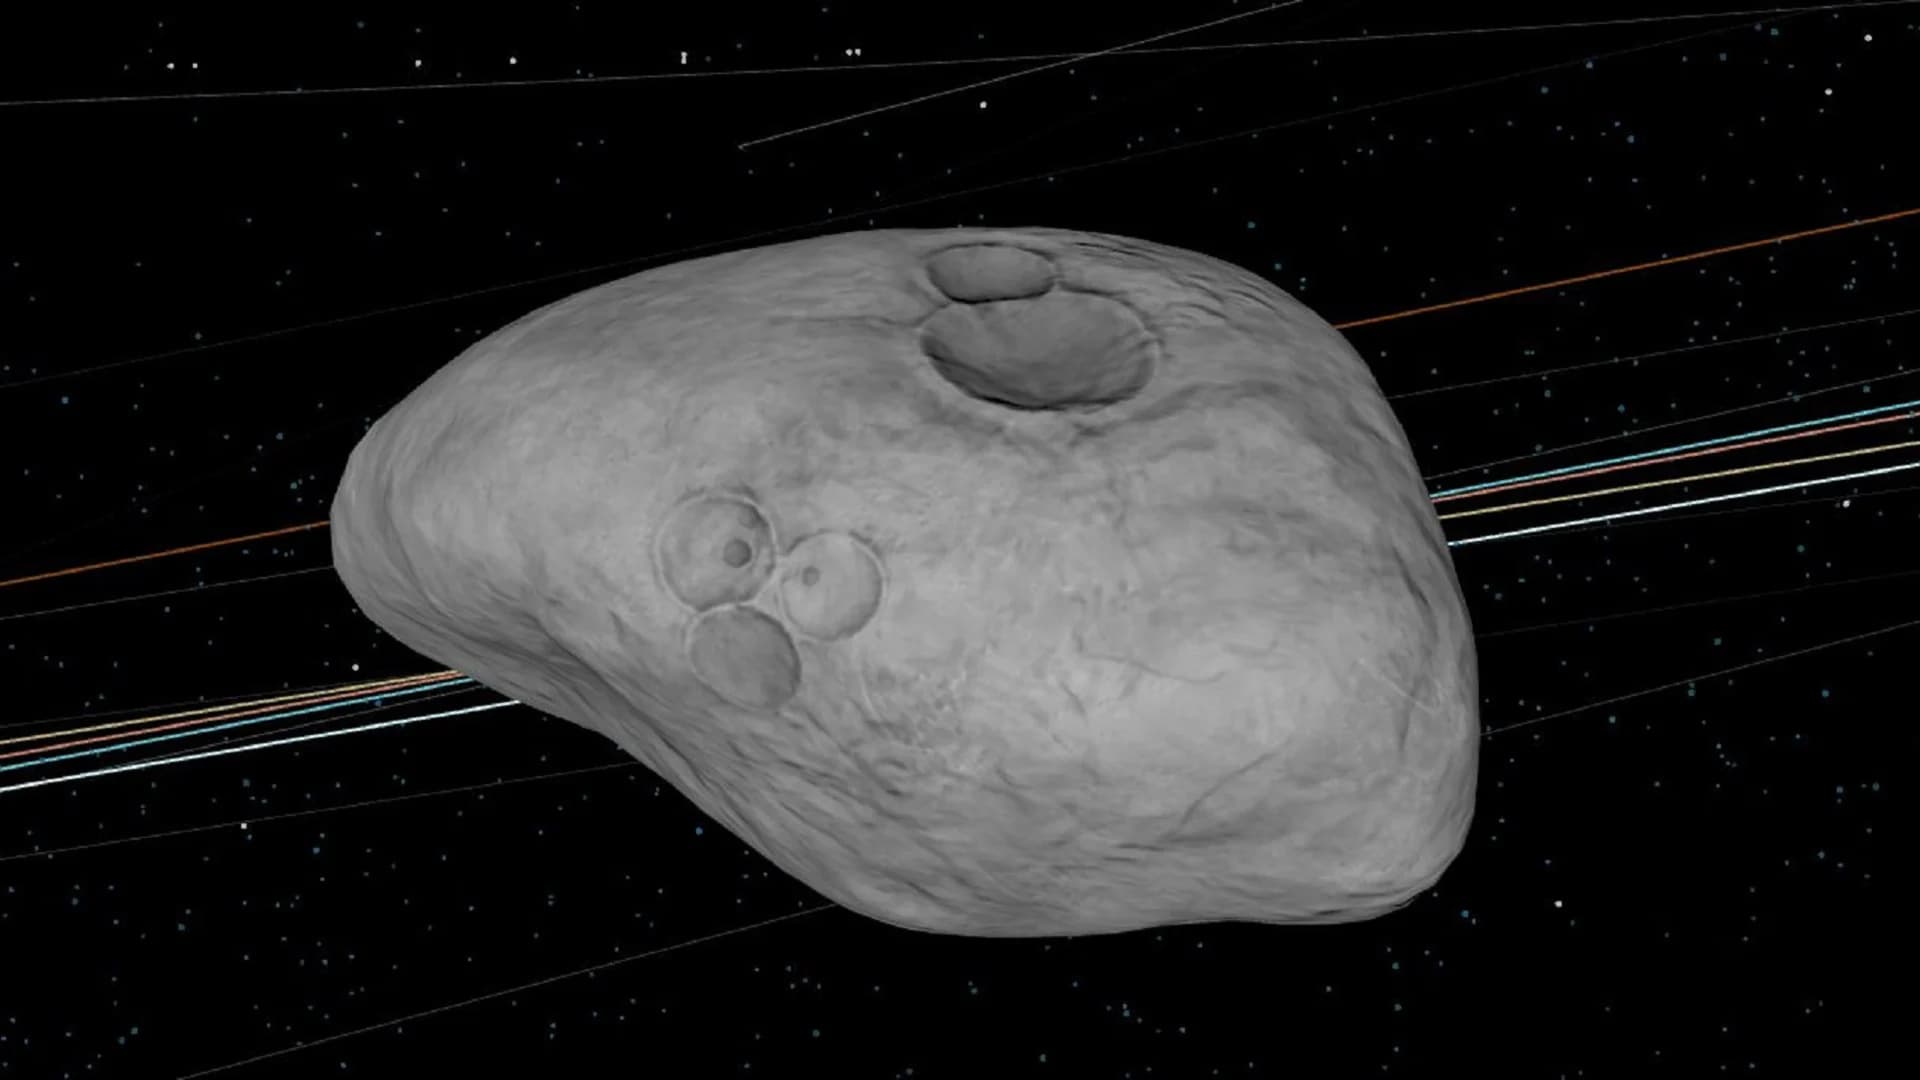 Massive 1 km asteroid safely flies by Earth